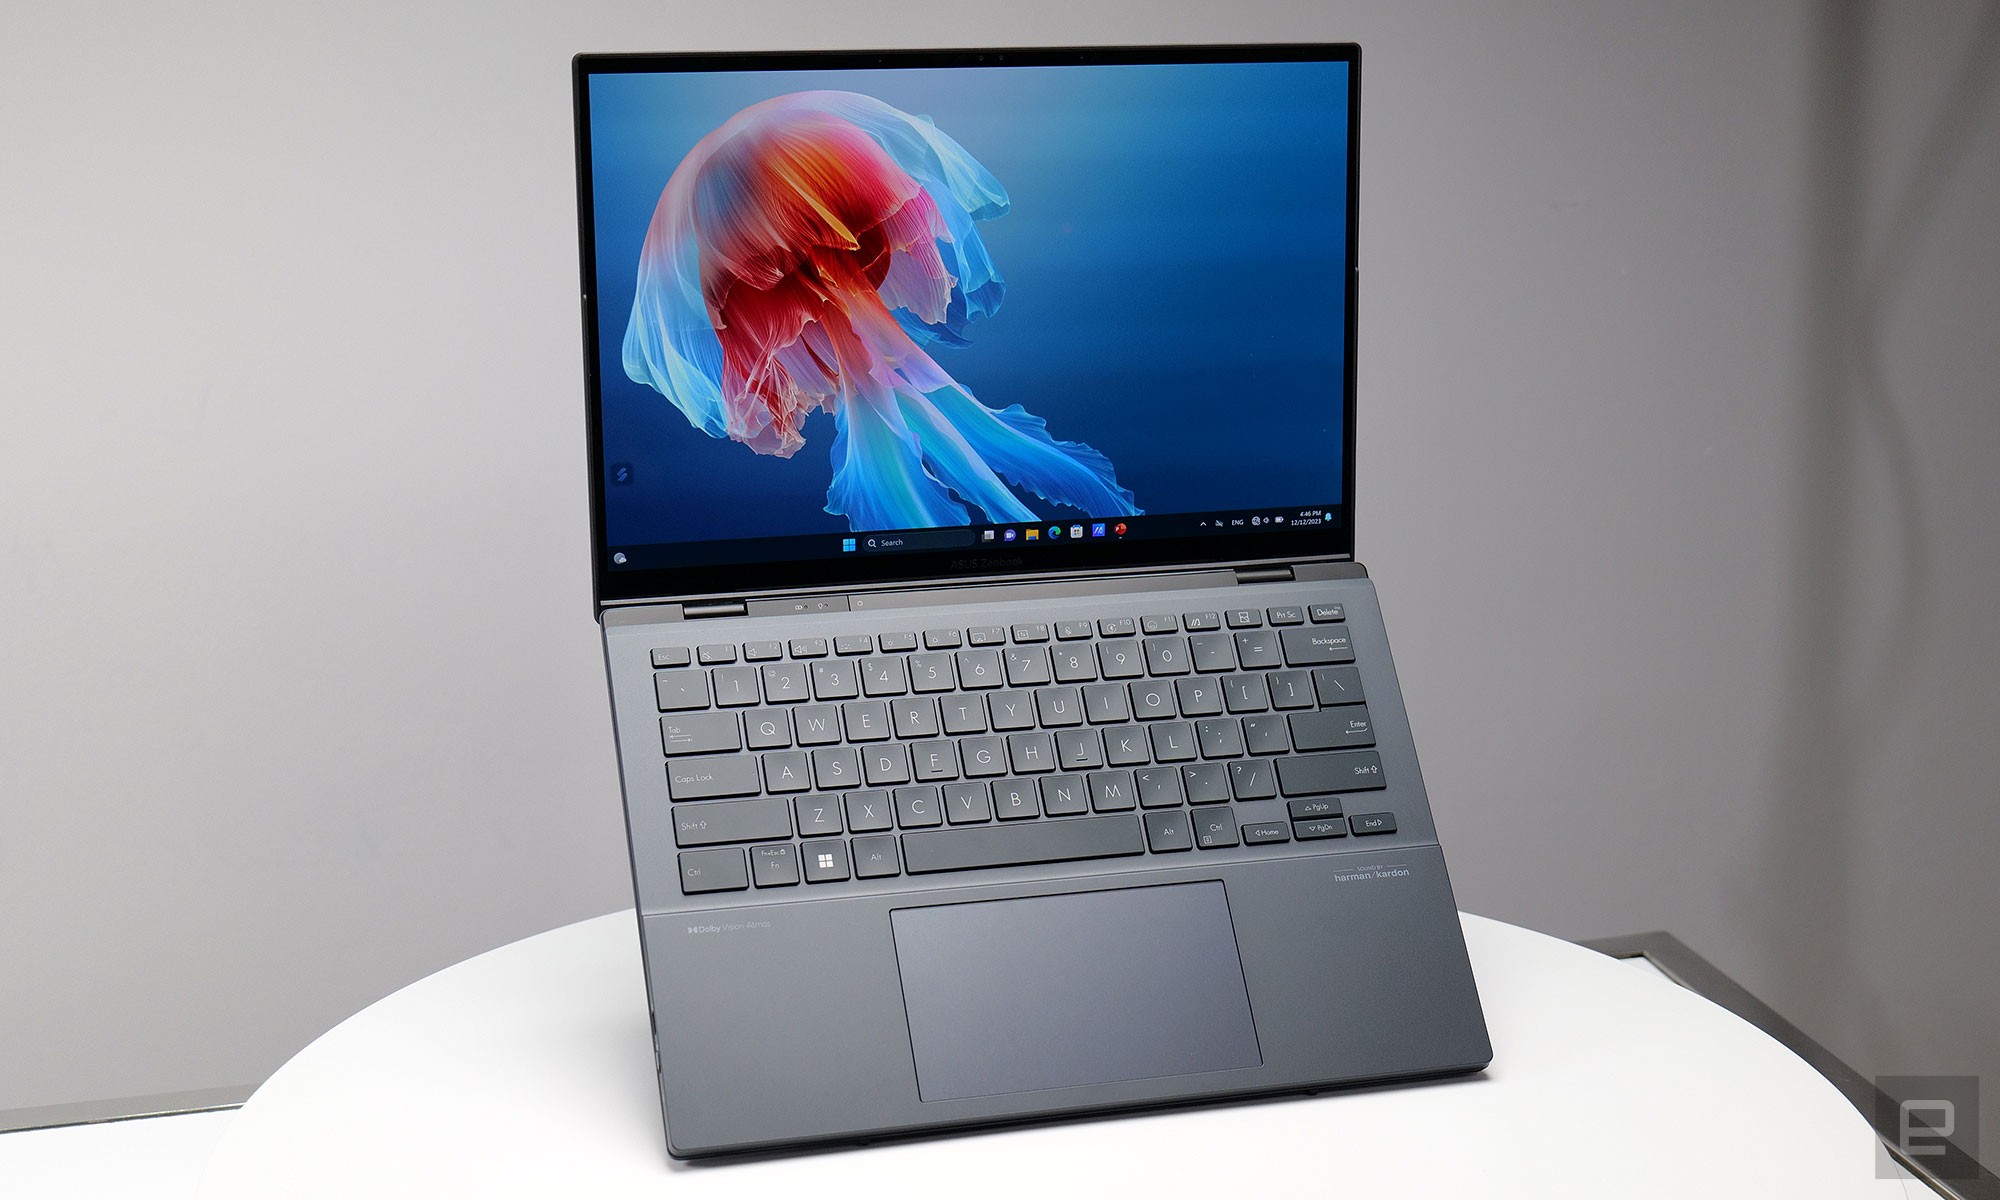 The amazing thing about the Zenbook Duo is that it's almost the same weight and size as a typical 14-inch laptop, while having a second display and a detachable keyboard. 